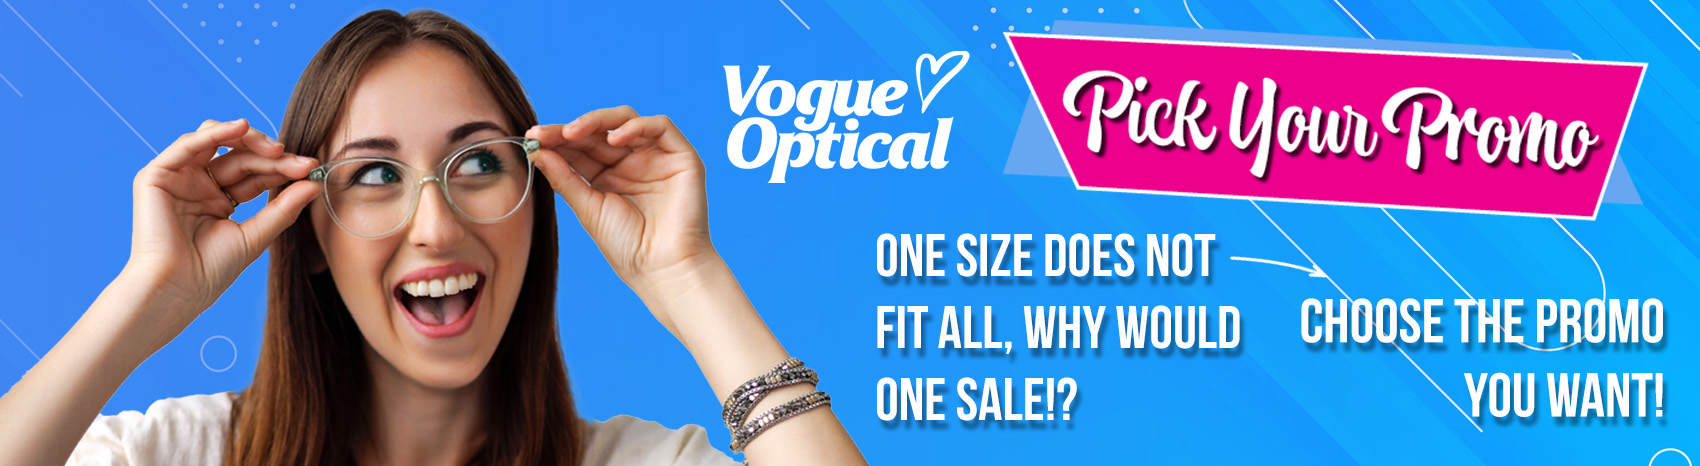 Glasses for Life promotional banner with purple background and girl with glasses - Vogue Optical 